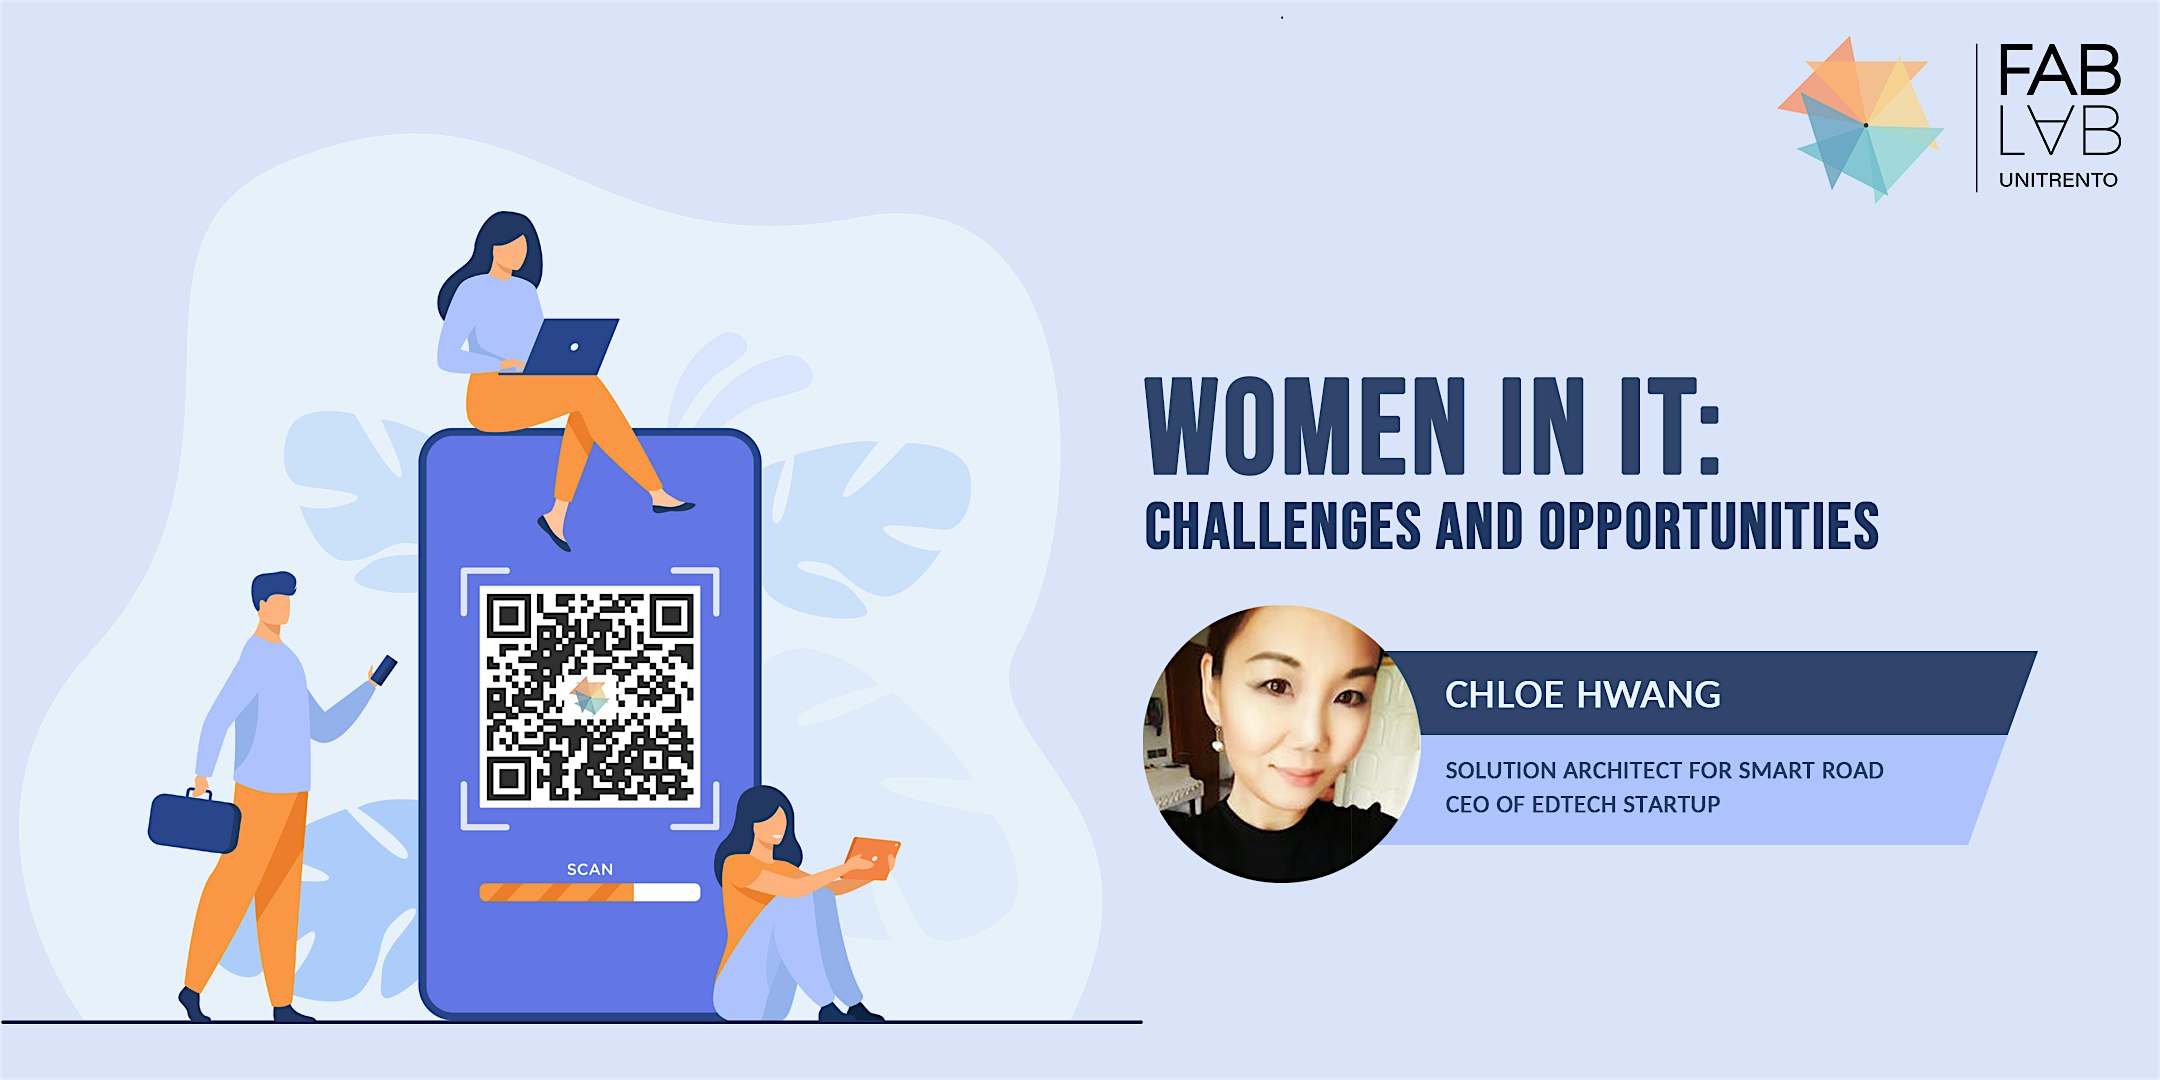 Women in IT: challenges and opportunities